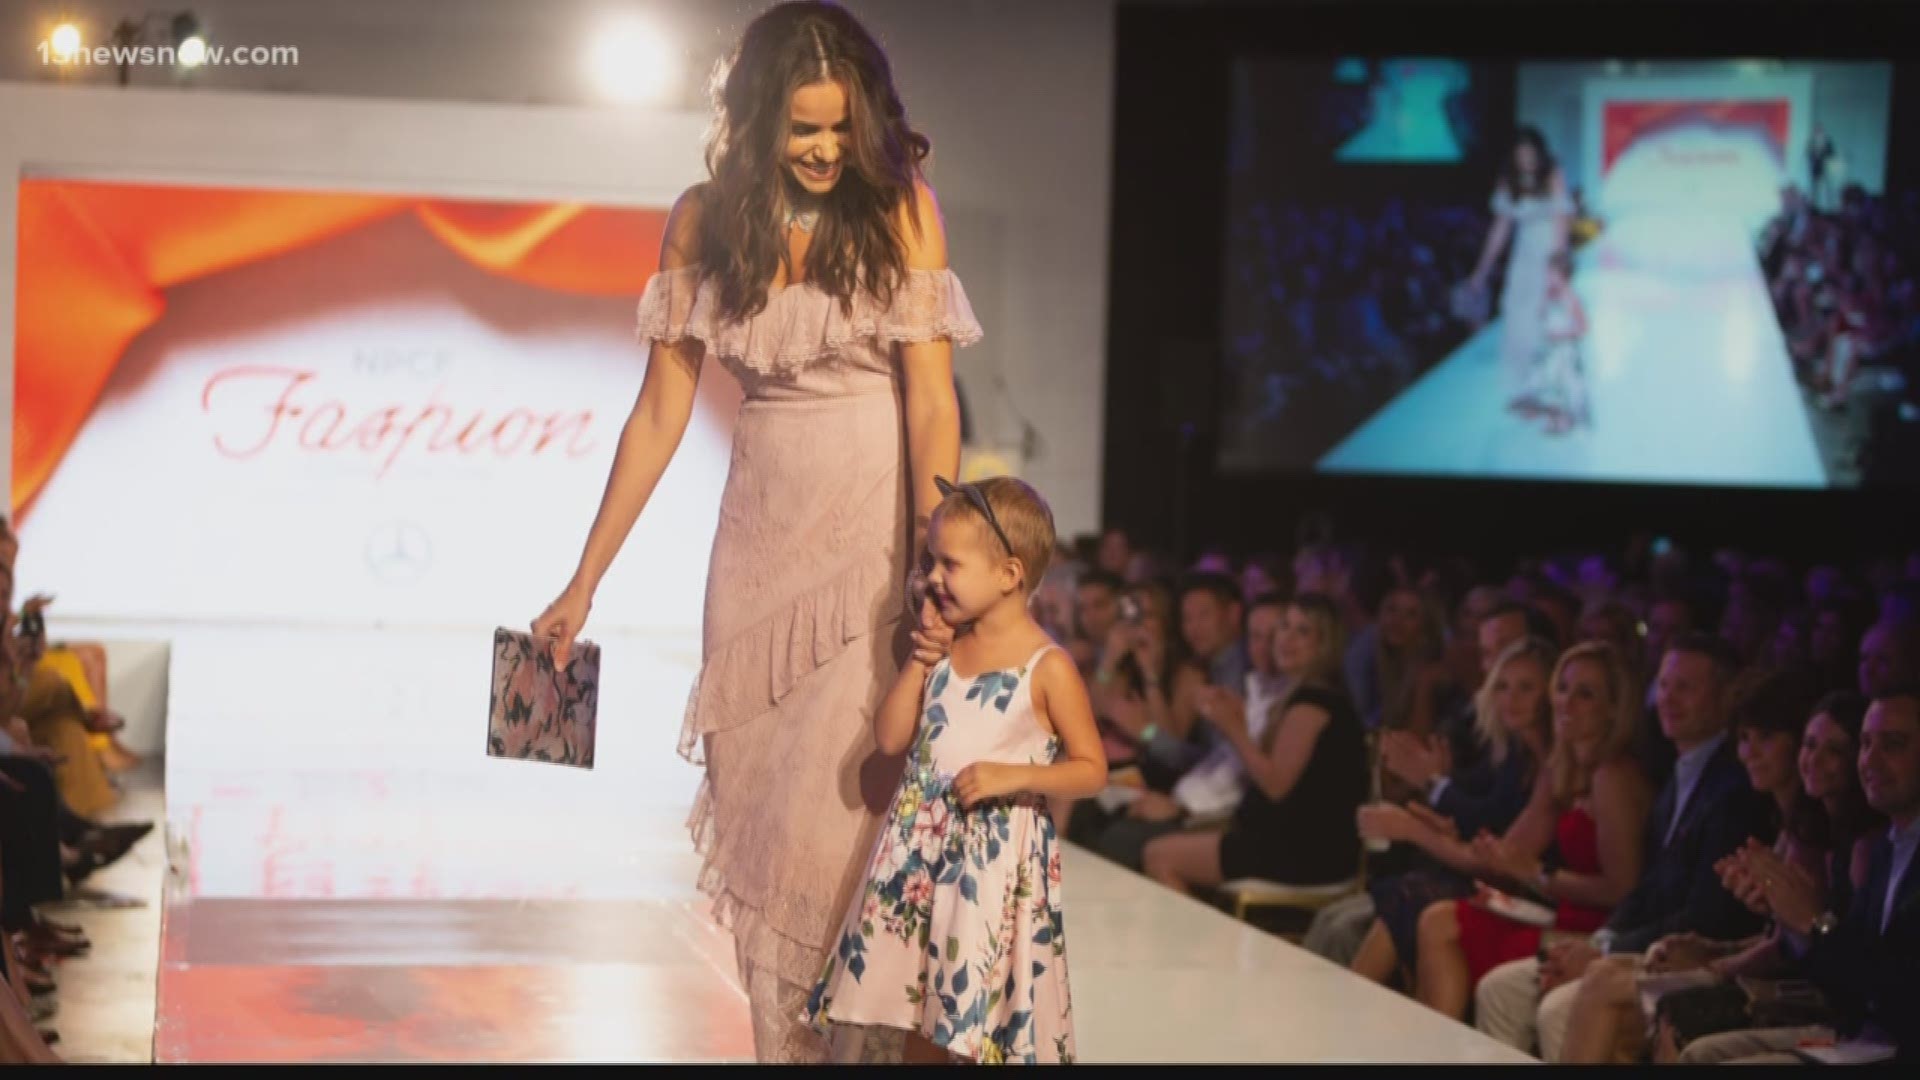 The National Pediatric Cancer Foundation is turning MacArthur Center into a runway for the Fashion Funds the Cure event. Children with a cancer diagnosis as well as cancer survivors will walk the runway.